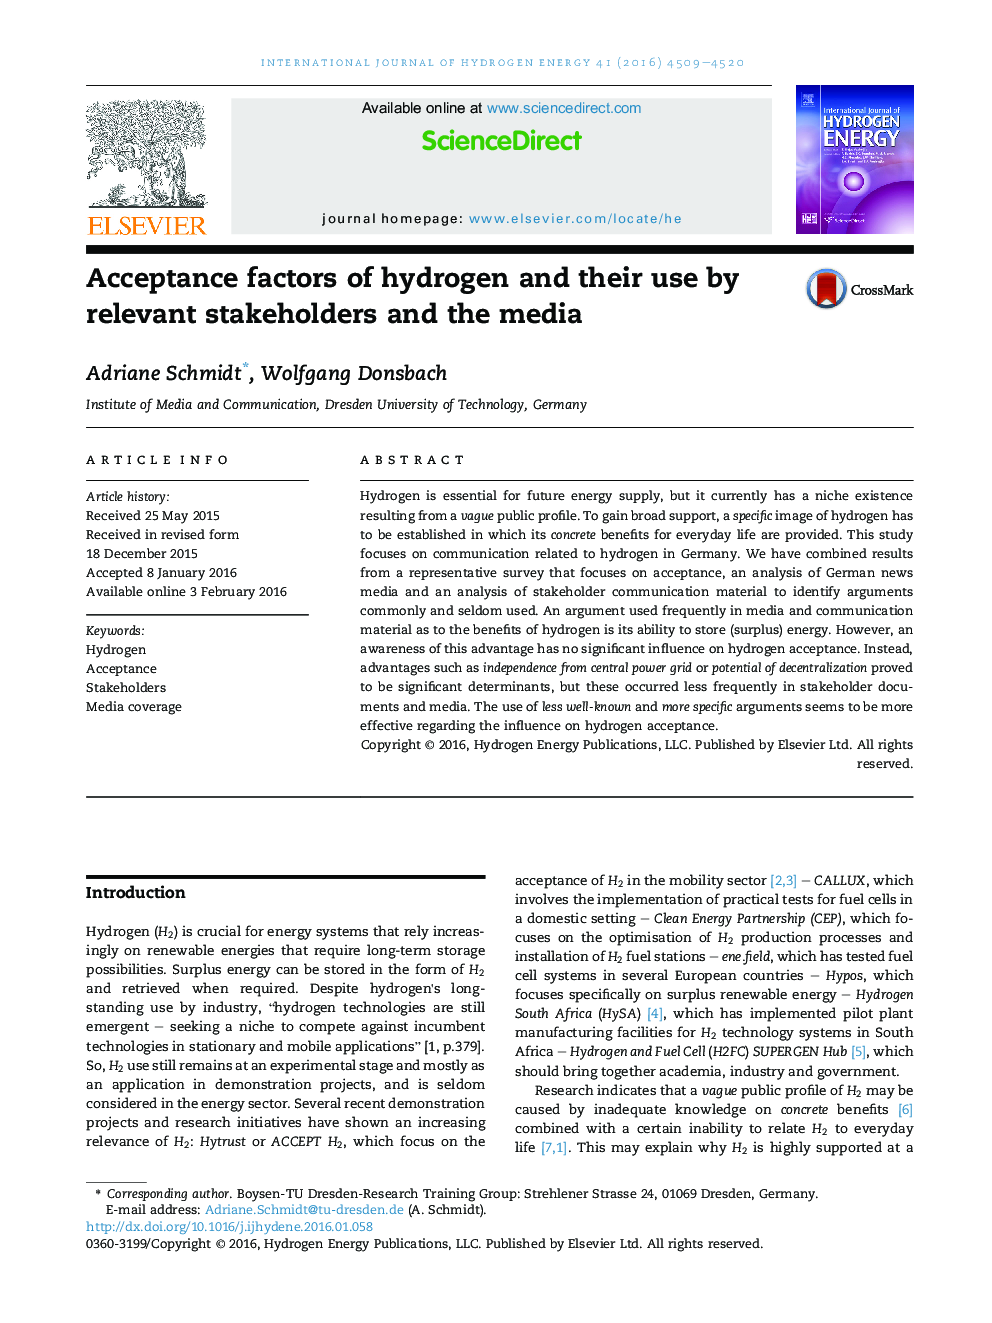 Acceptance factors of hydrogen and their use by relevant stakeholders and the media